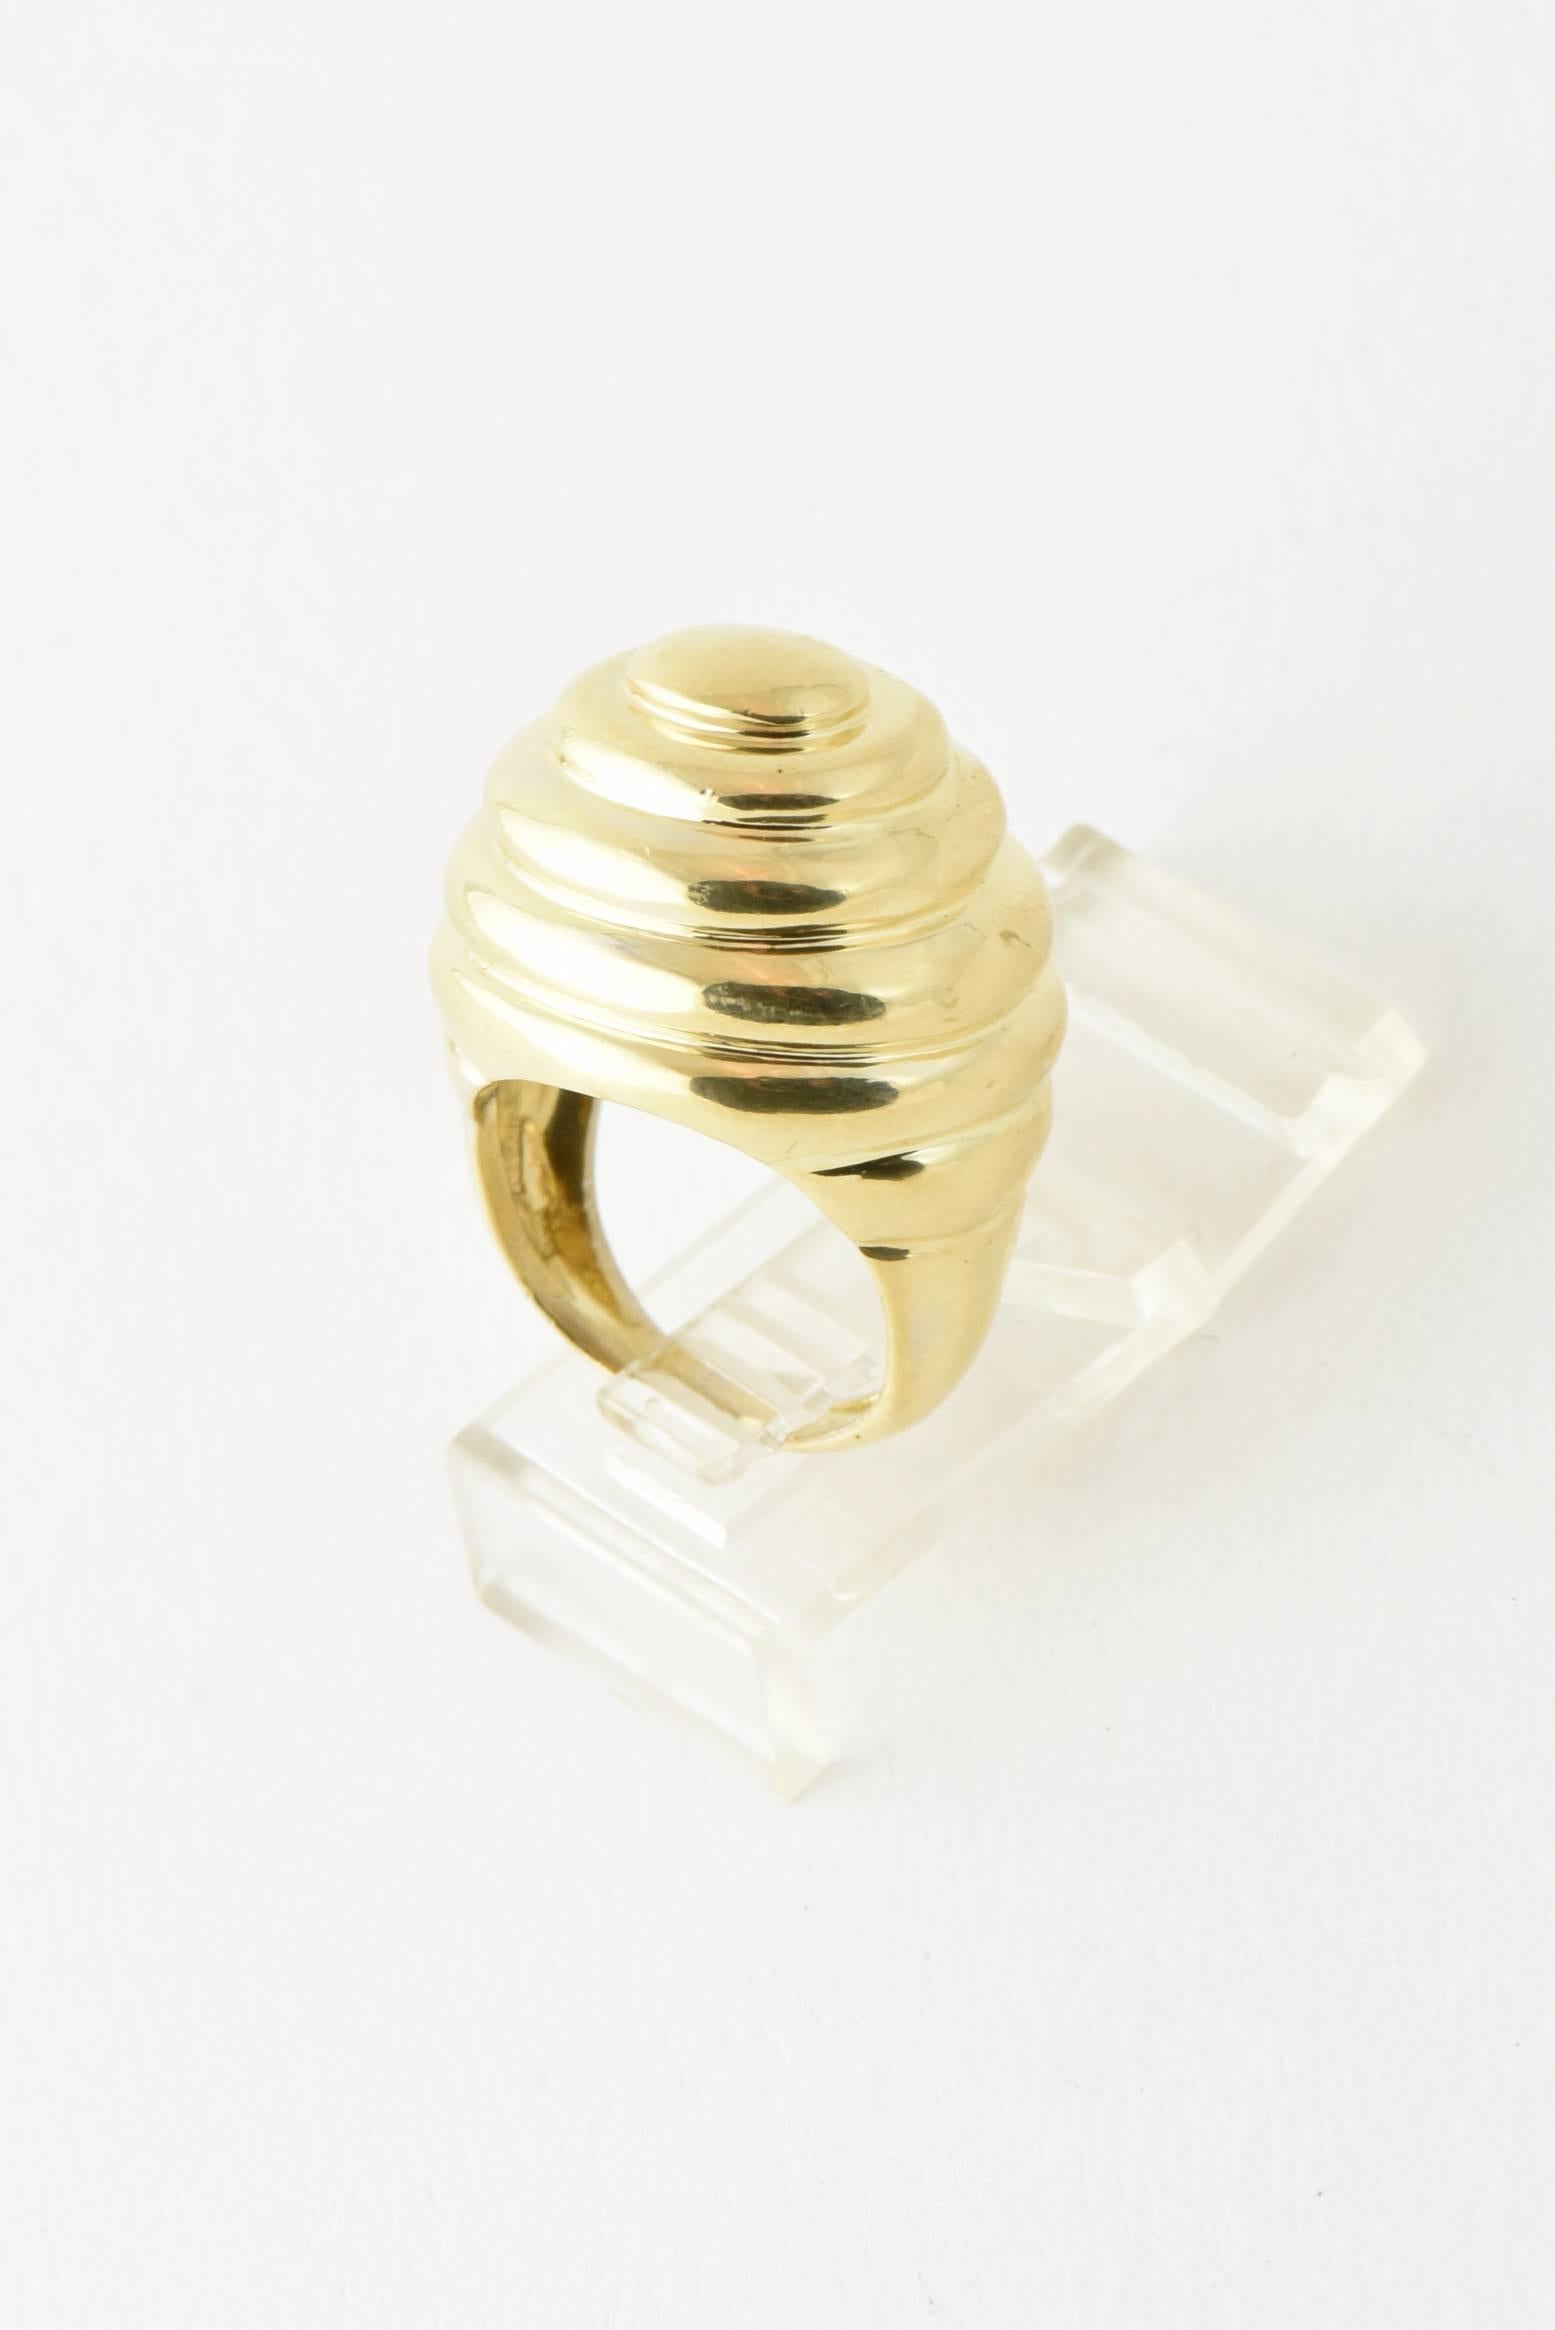 East - West Oval Three Dimensional Dome Gold Cocktail Ring by Molina 2